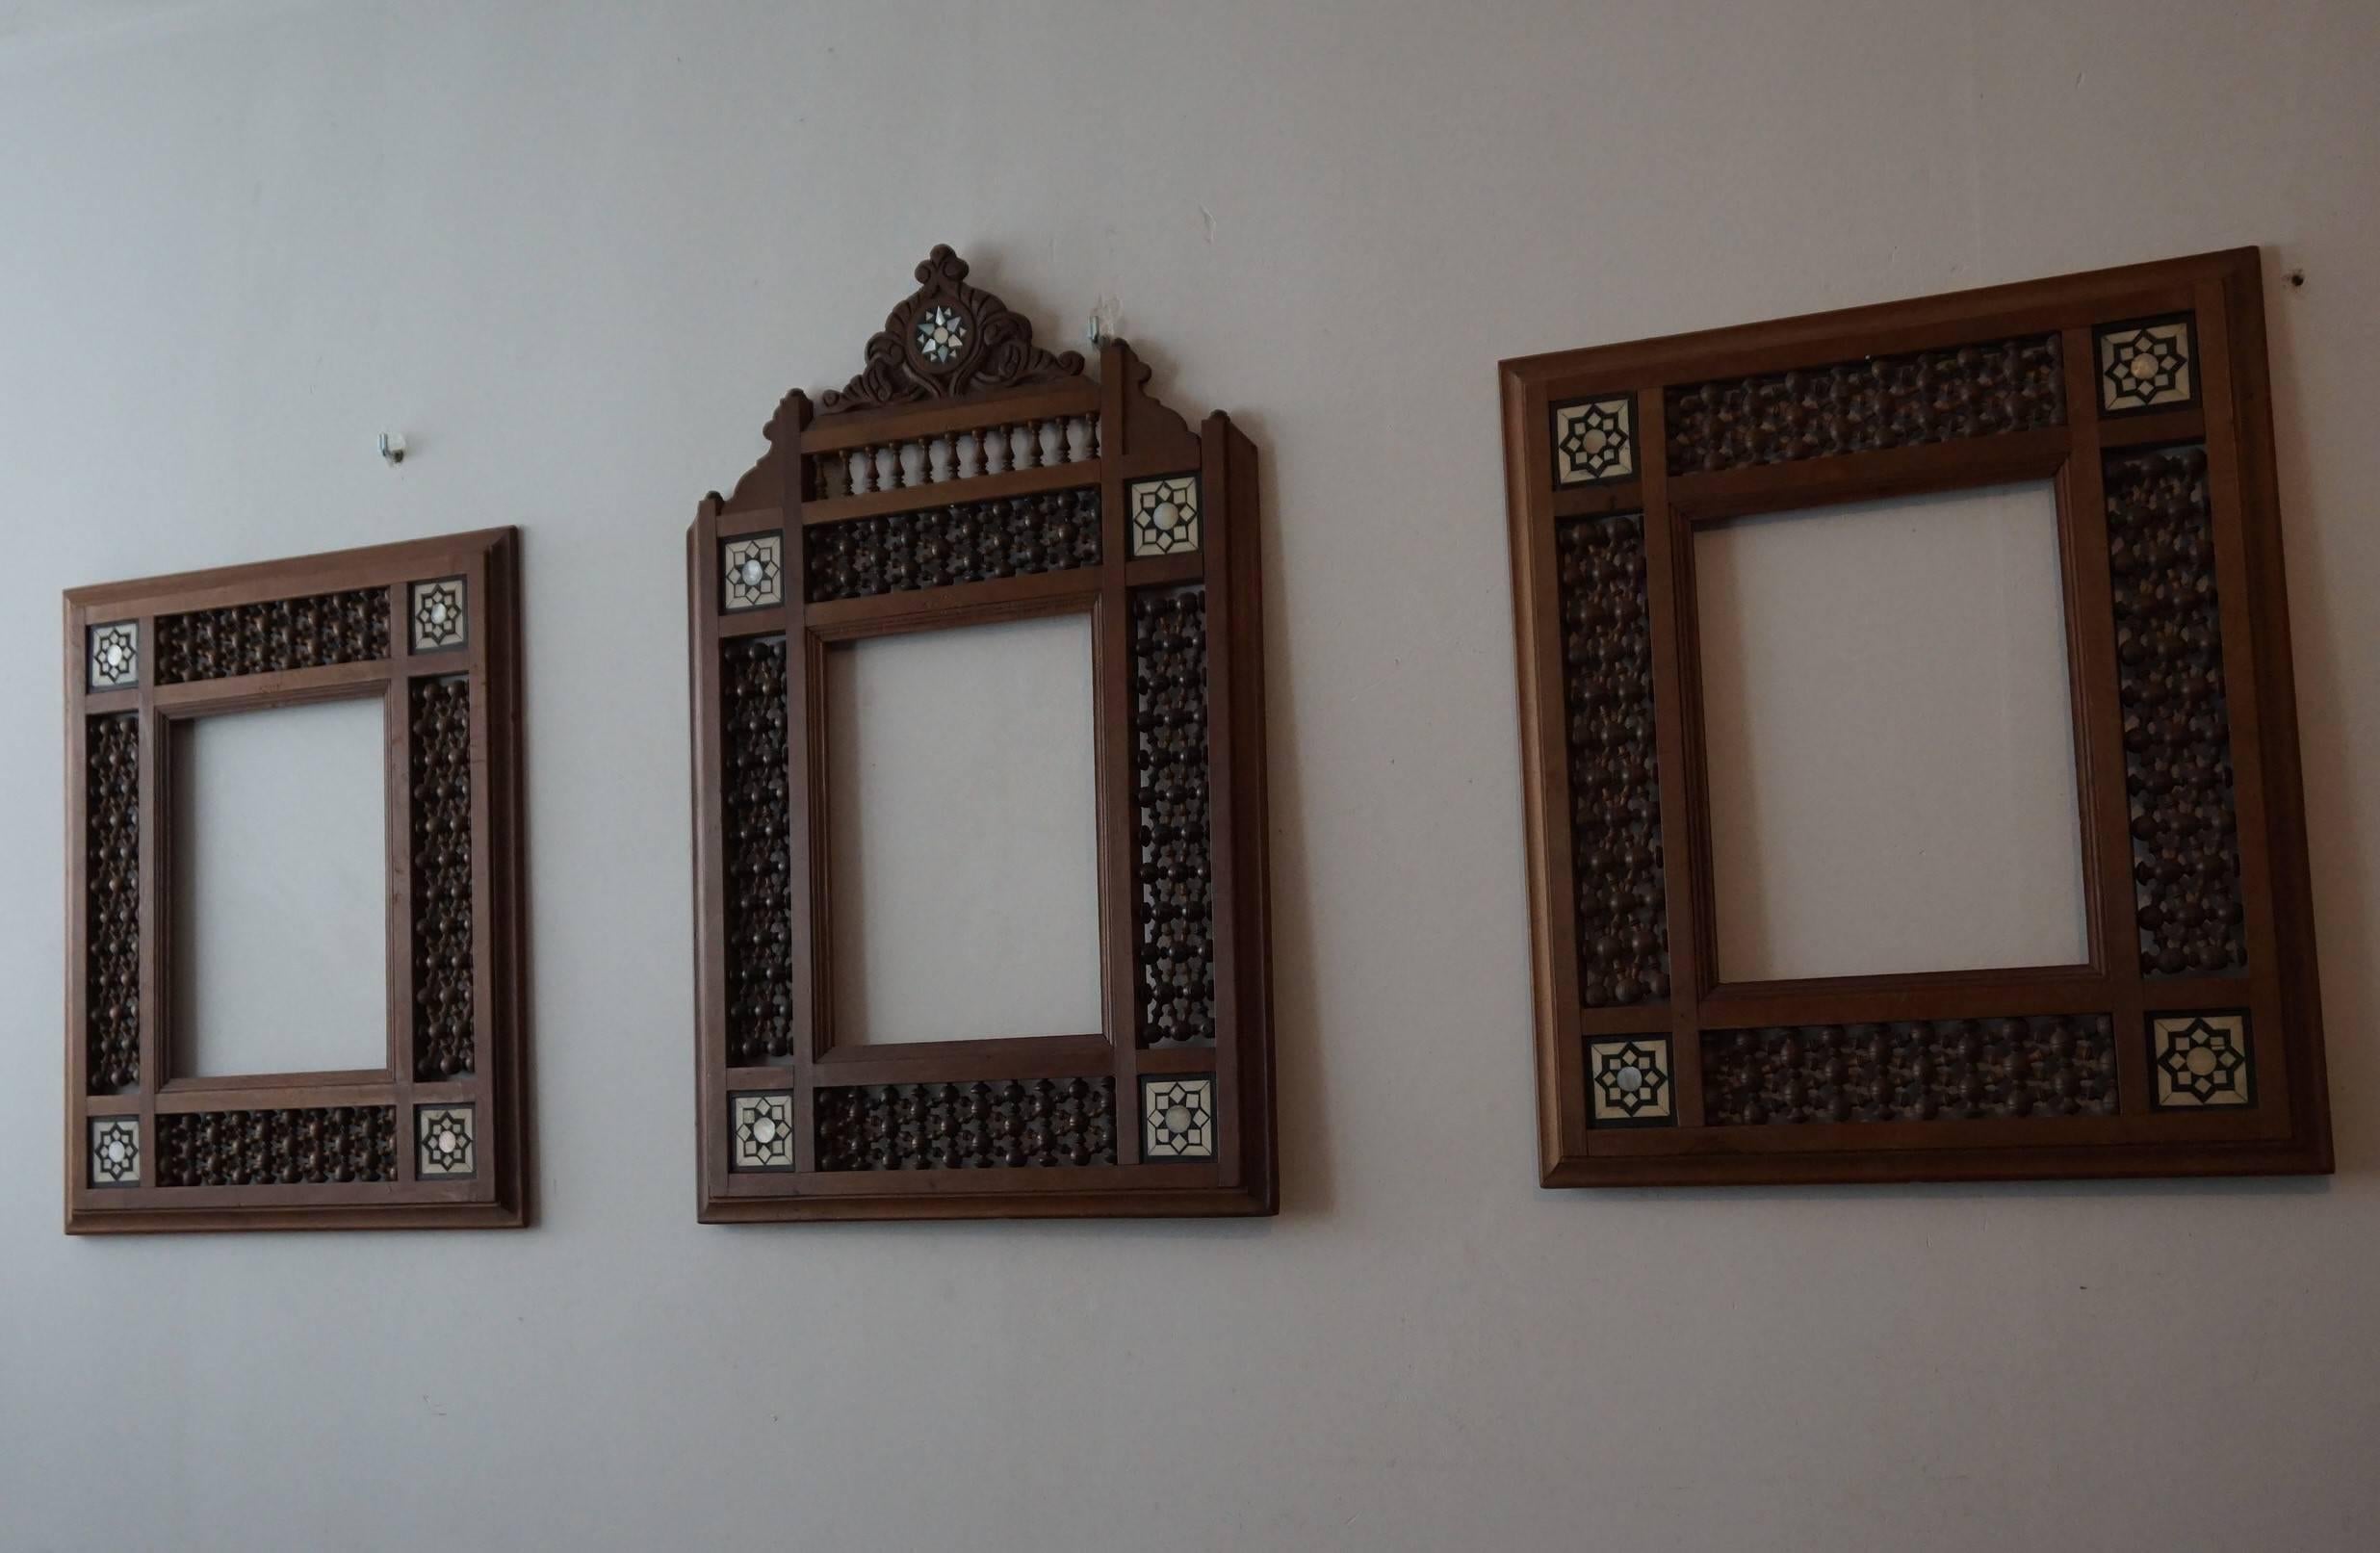 All handcrafted and very stylish set of picture, mirror or photograph frames with inlaid Islamic motifs.

If you have an Arabic (inspired) interior then this set of three Moorish picture frames will make great decoration on your wall. They would